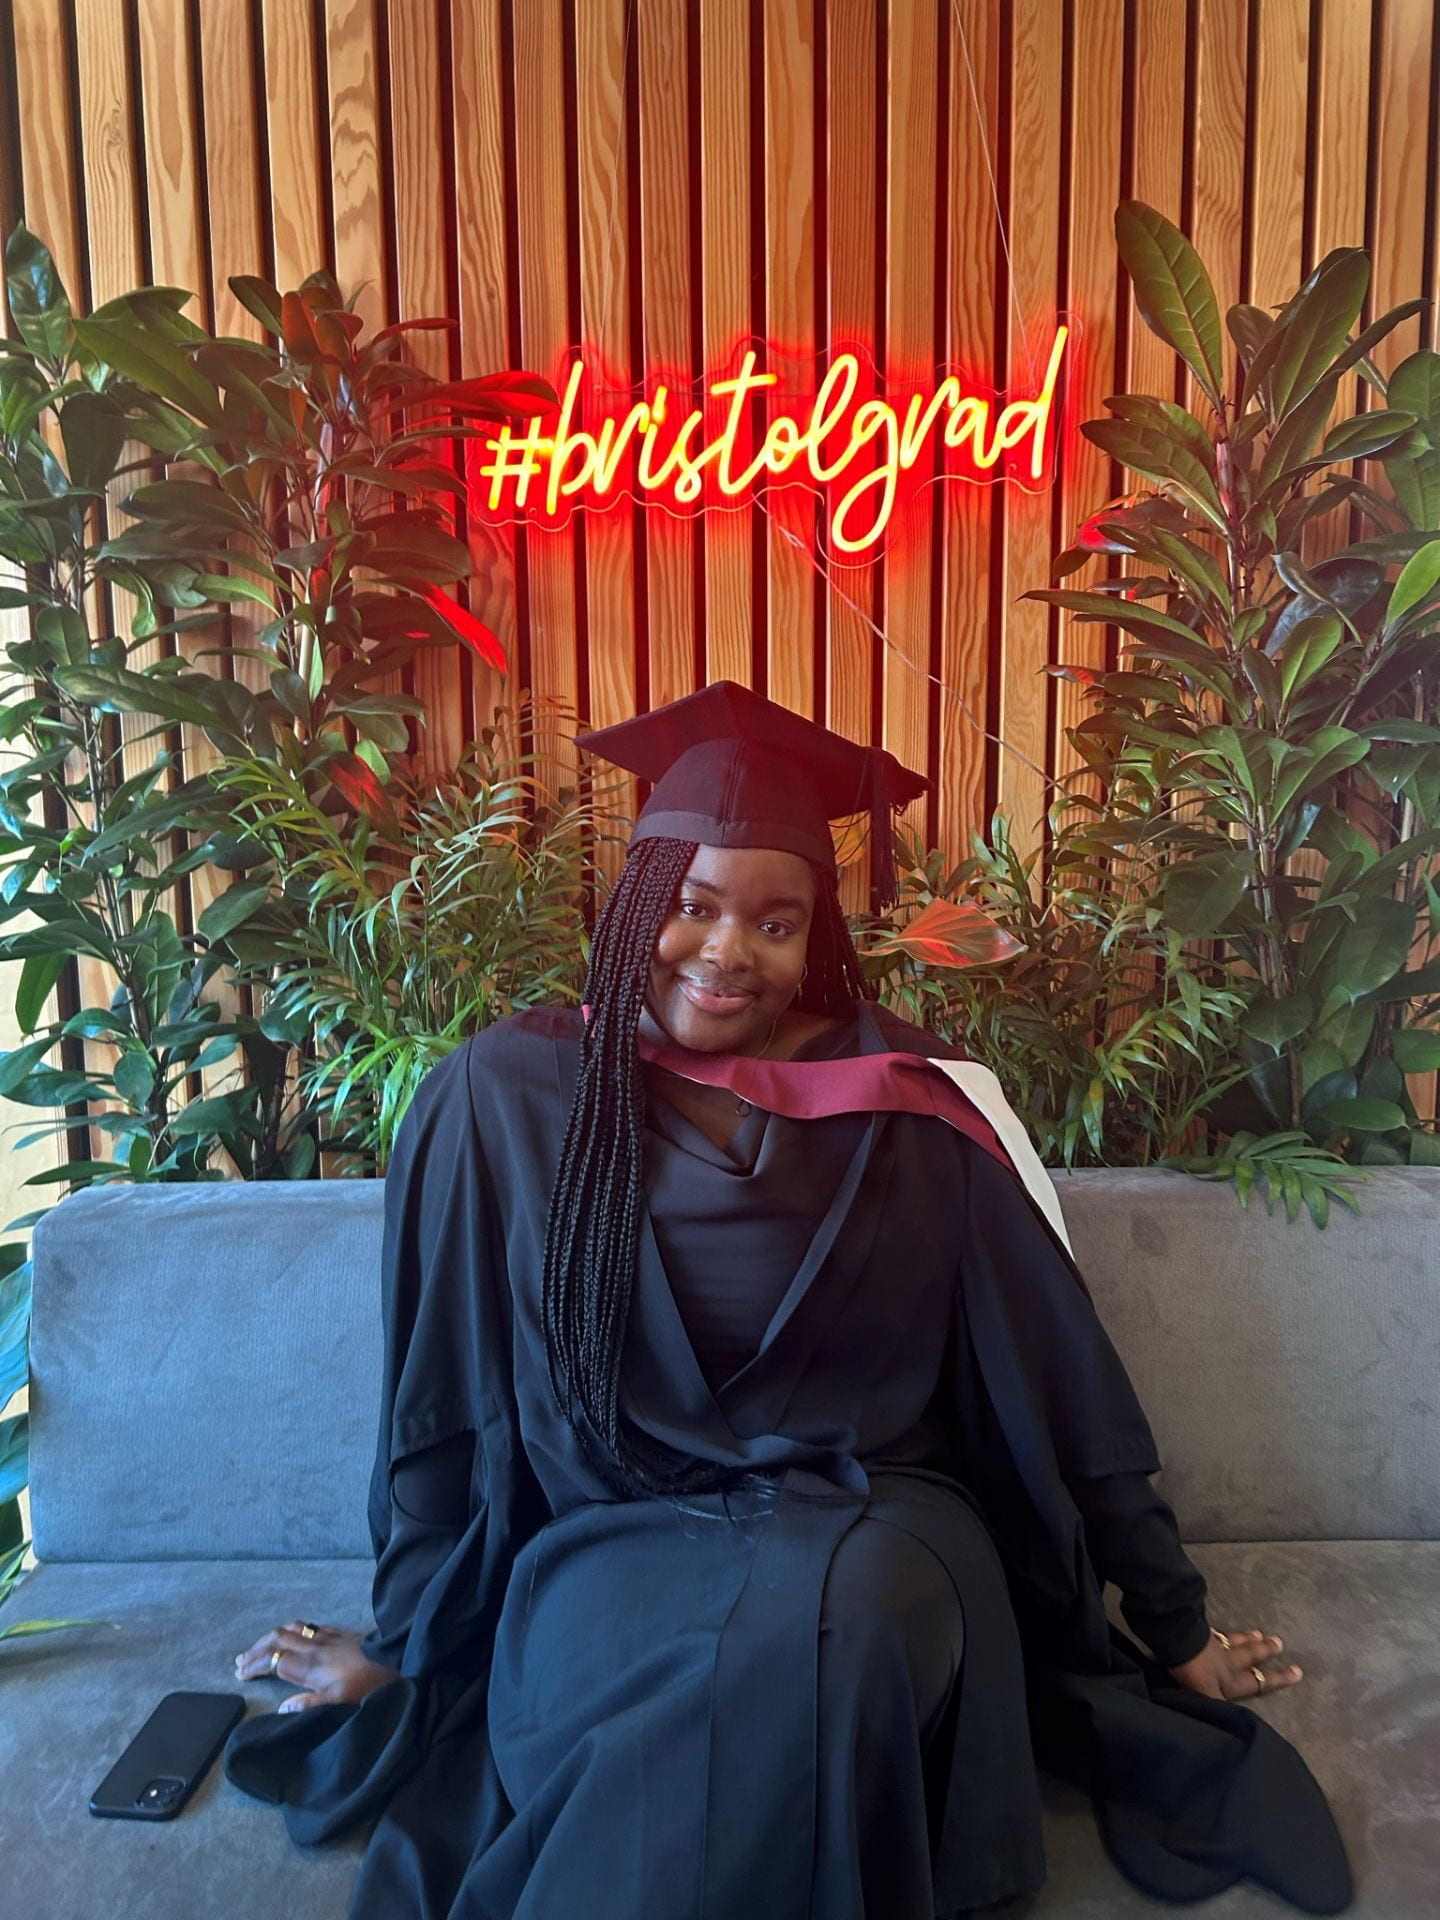 law student, Oladayo Ige, wearing a black graduation gown and cap, sitting in front a wooden panneled wall covered in plants with a neon sign saying #bristolgrad.